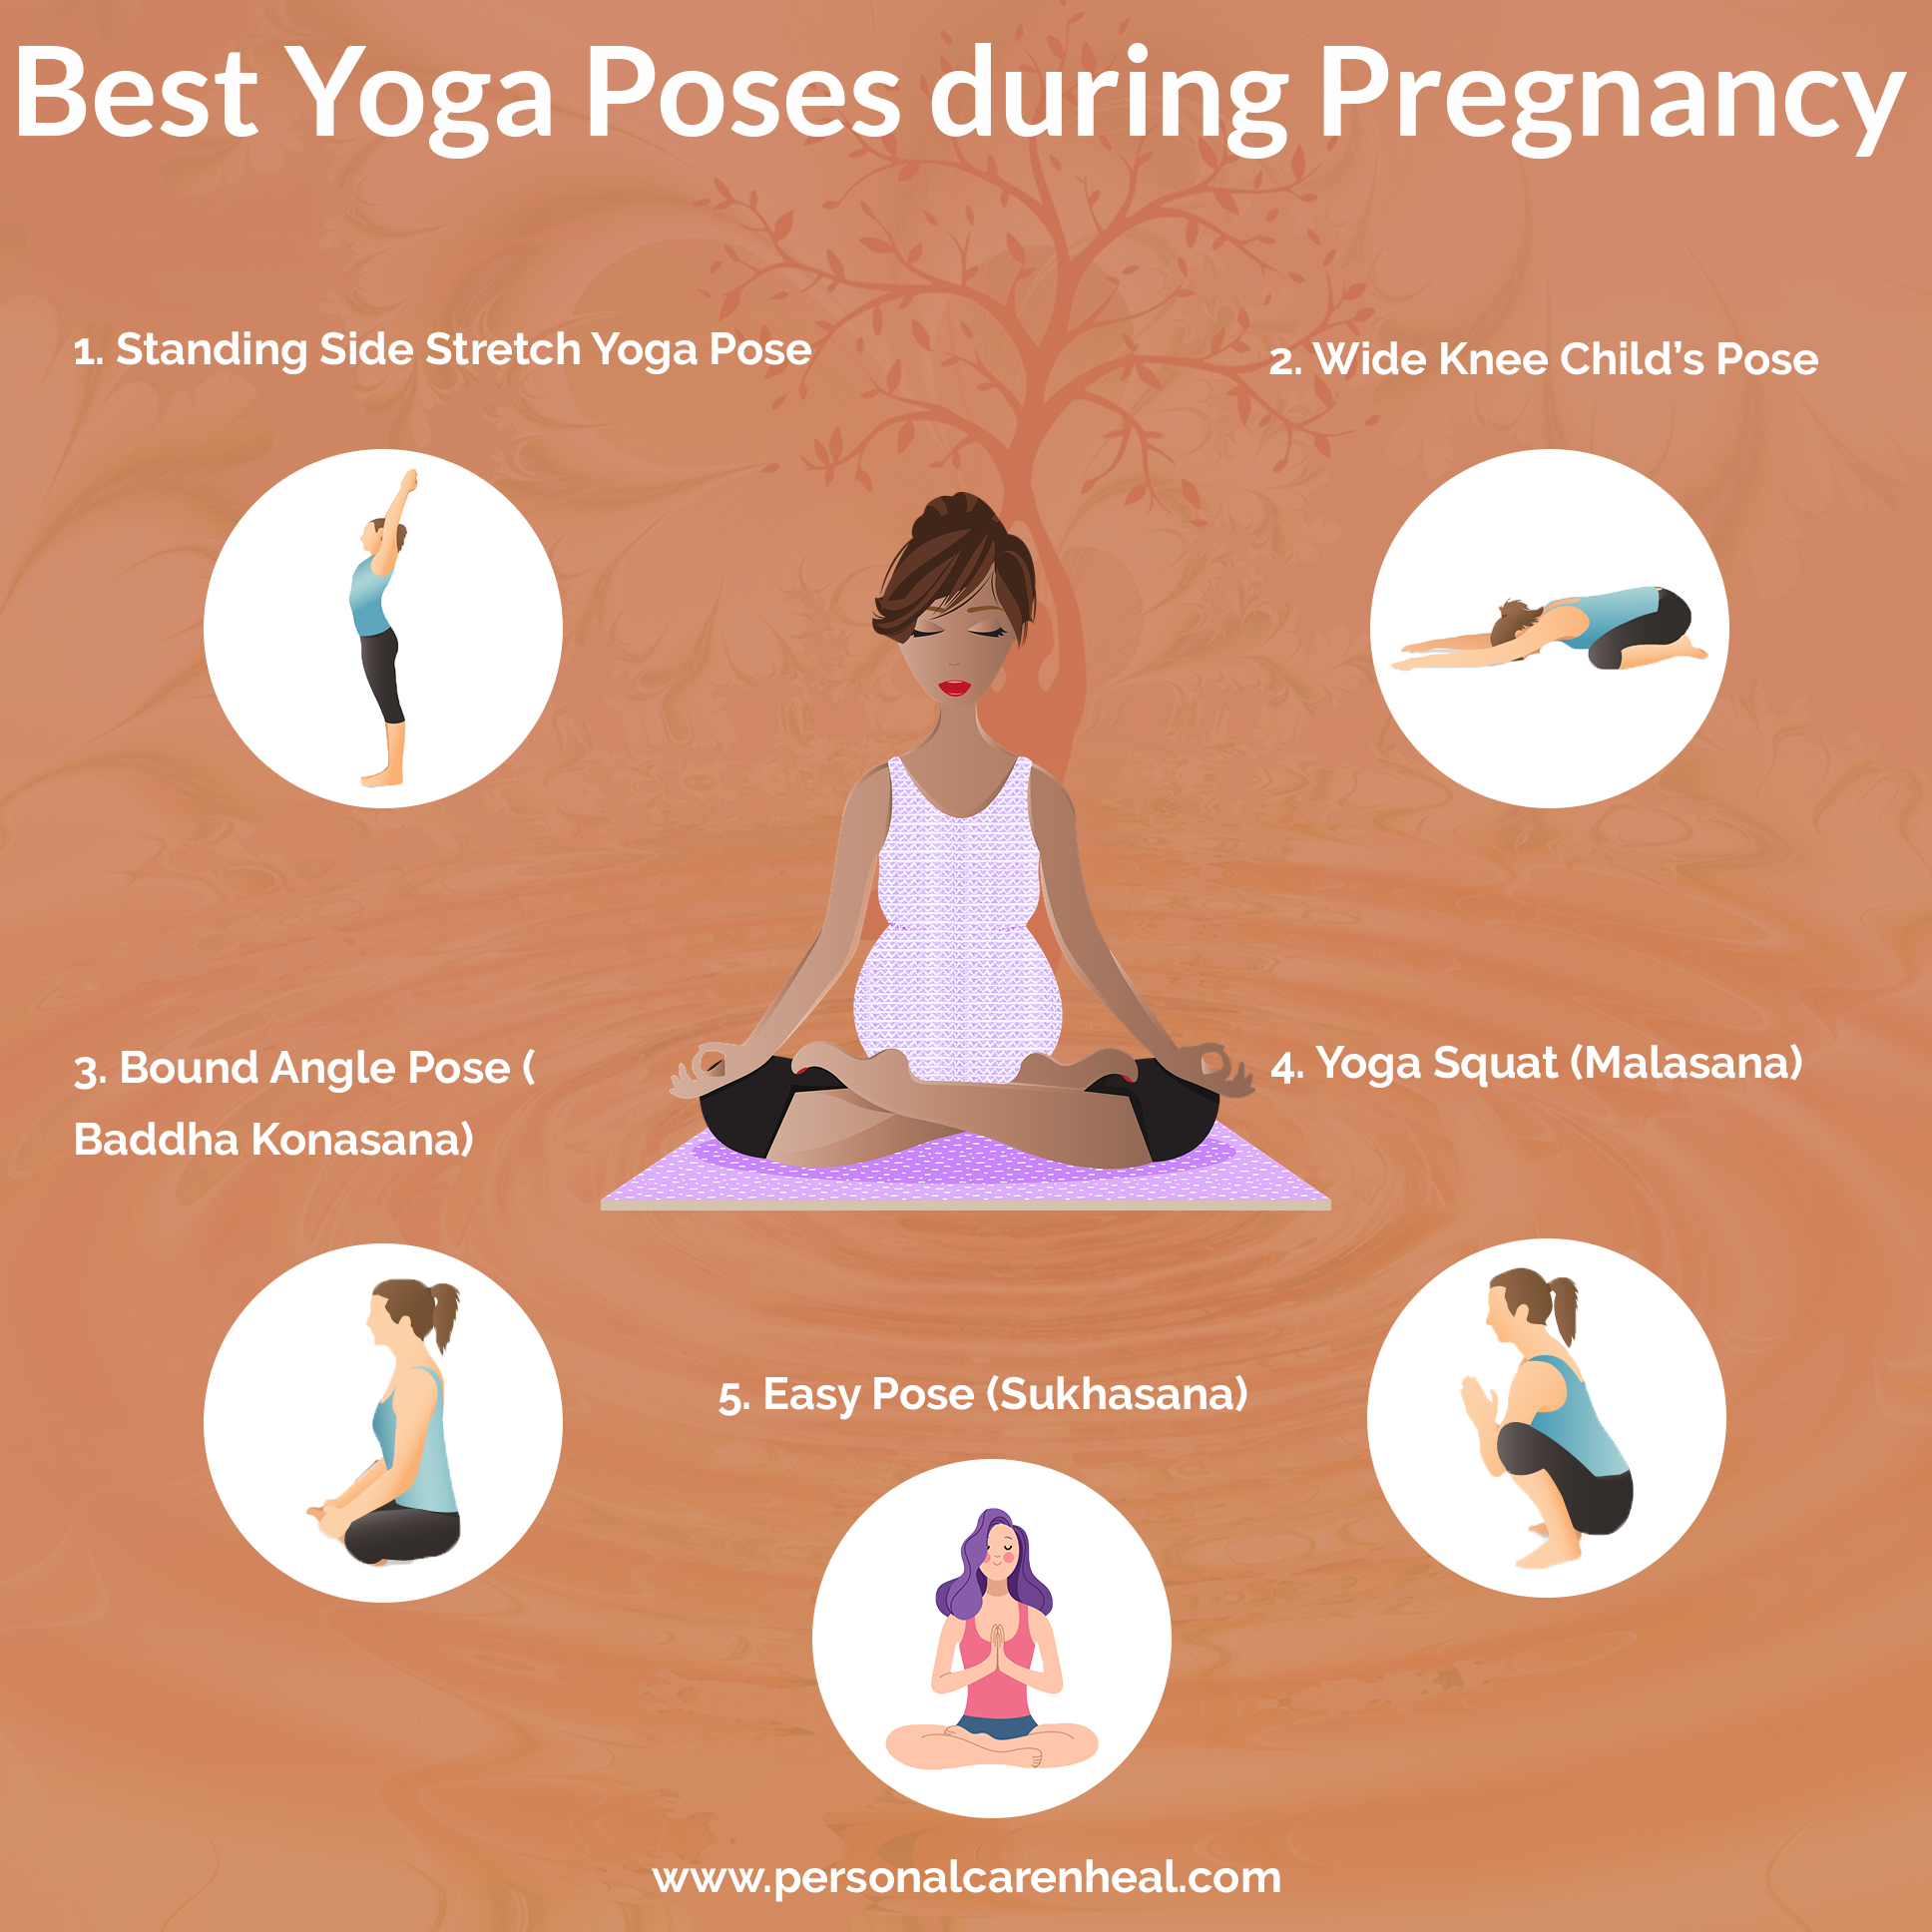 Pregnancy Stretches That Are Safe and Beneficial for Pregnant Women